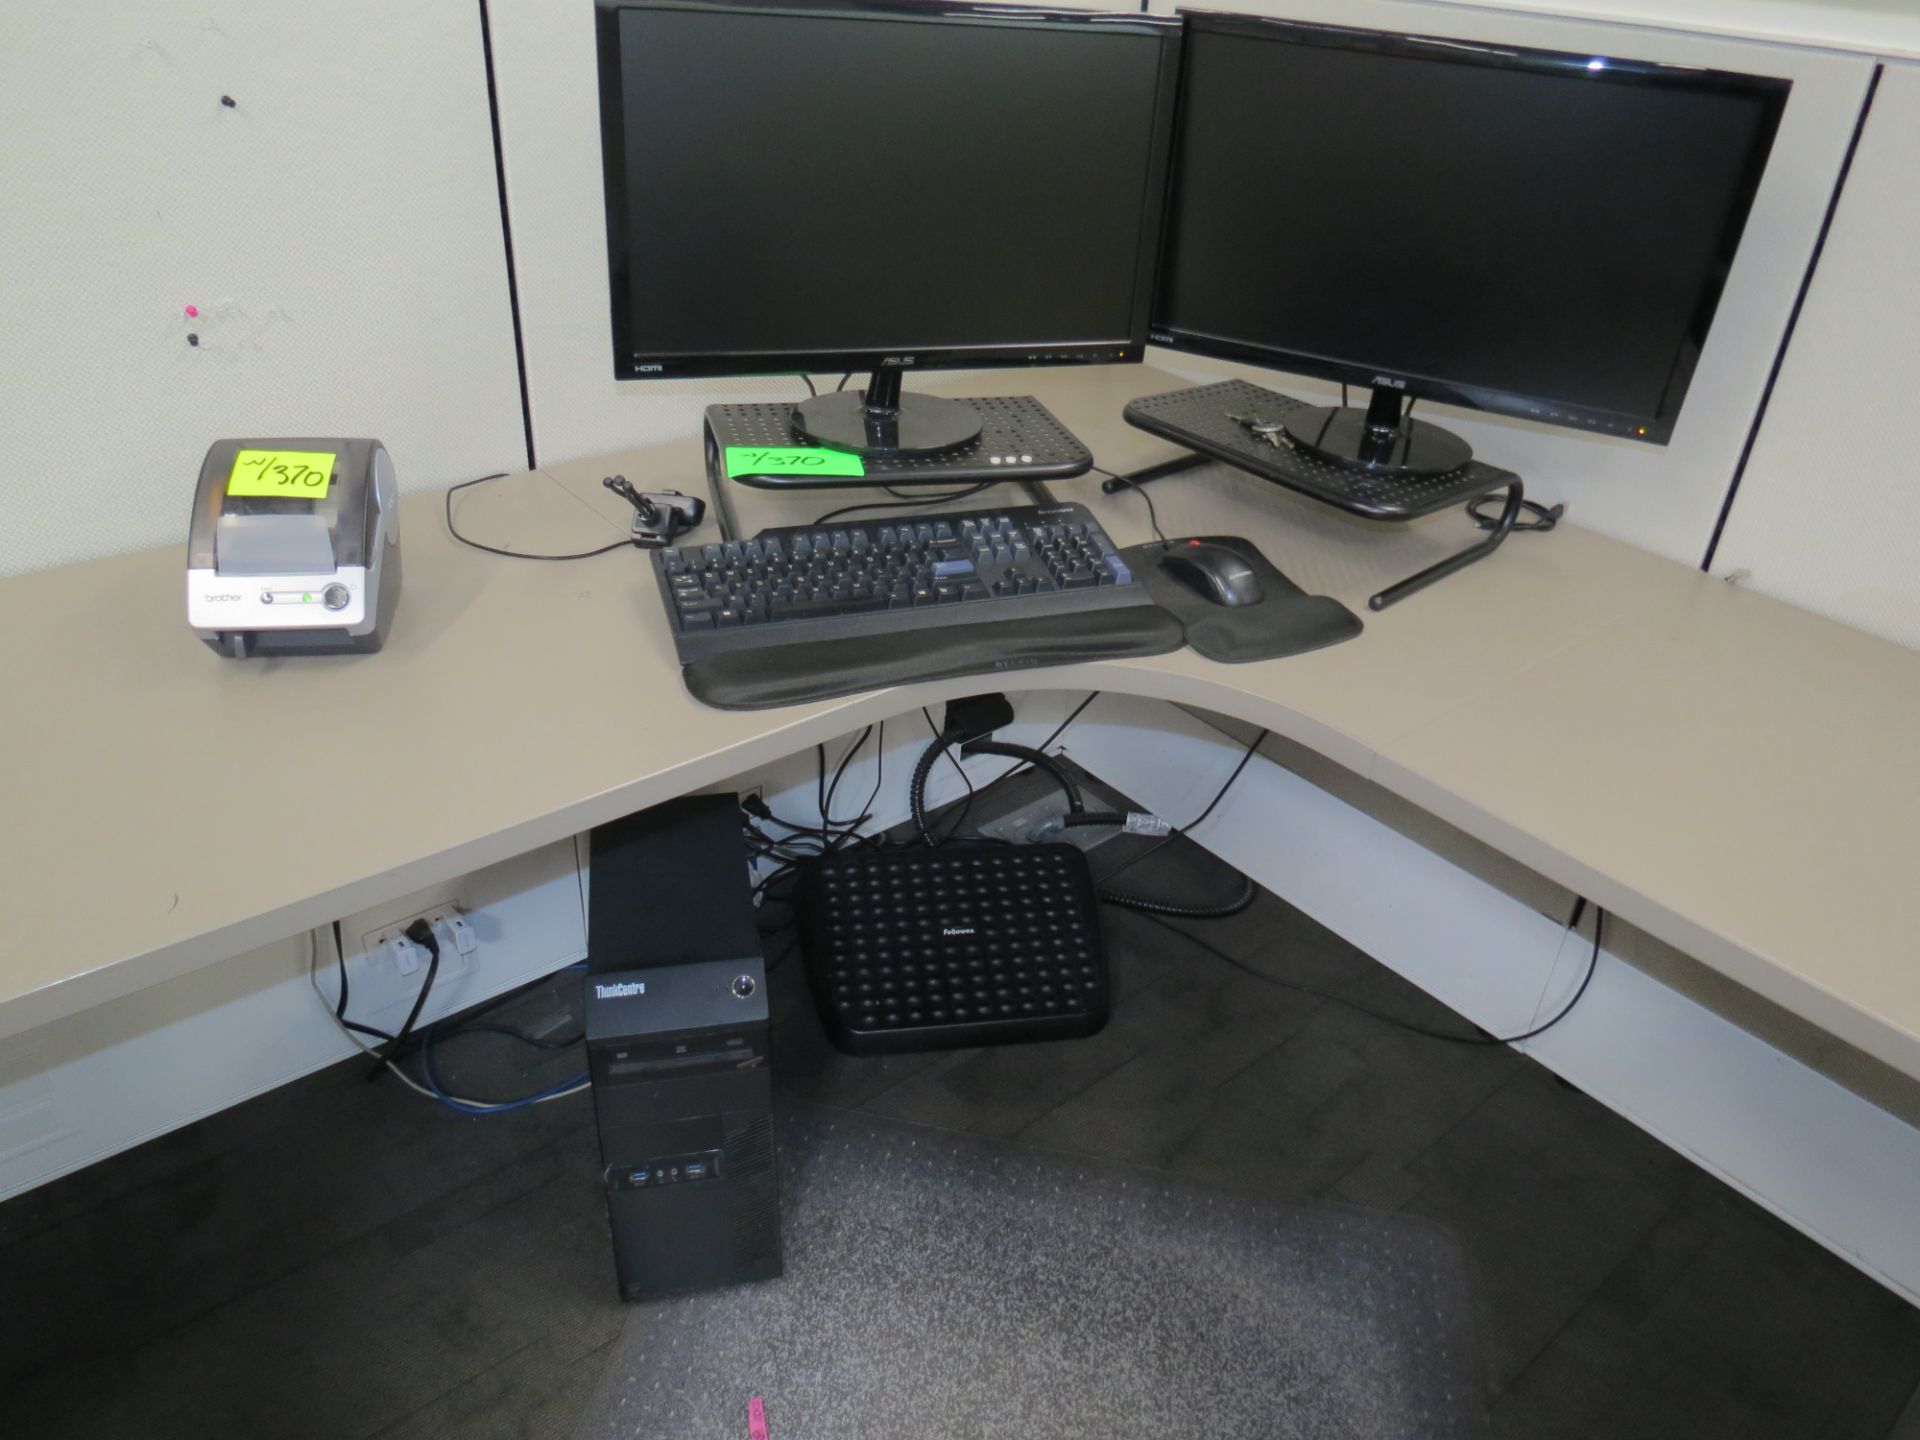 2 LENOVO THINKCENTRE TOWER DESKTOPS, P-TOUCH QL-500 & BROTHER LABEL PRINTERS, 4 MONITORS, - Image 5 of 8